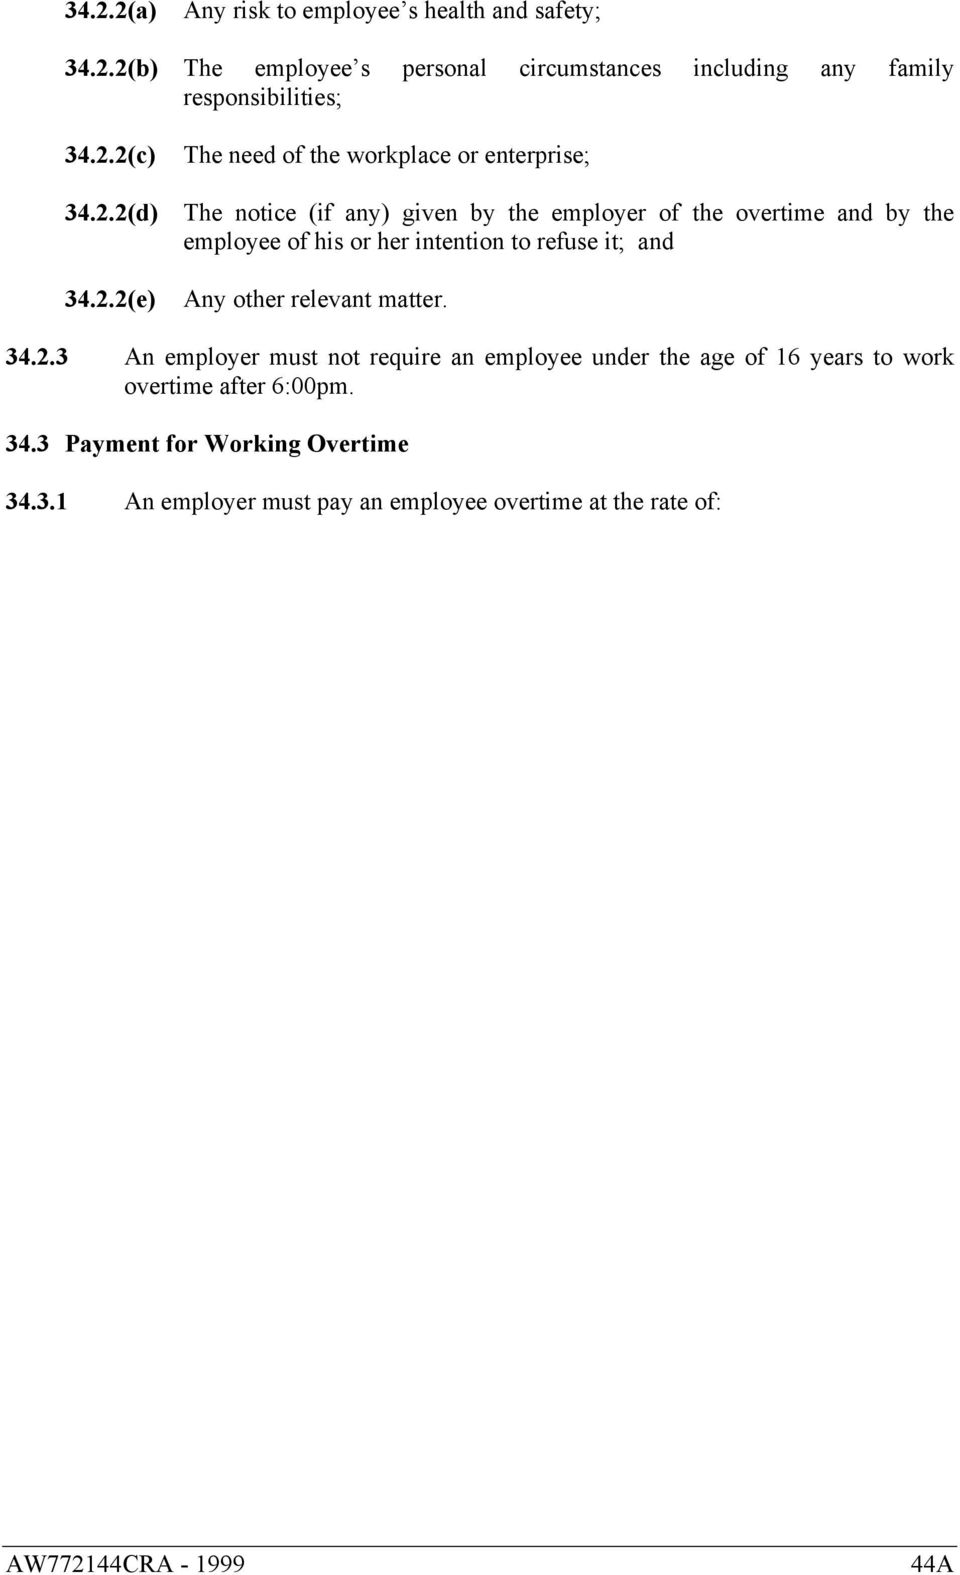 34.2.3 An employer must not require an employee under the age of 16 years to work overtime after 6:00pm. 34.3 Payment for Working Overtime 34.3.1 An employer must pay an employee overtime at the rate of: AW772144CRA - 1999 44A